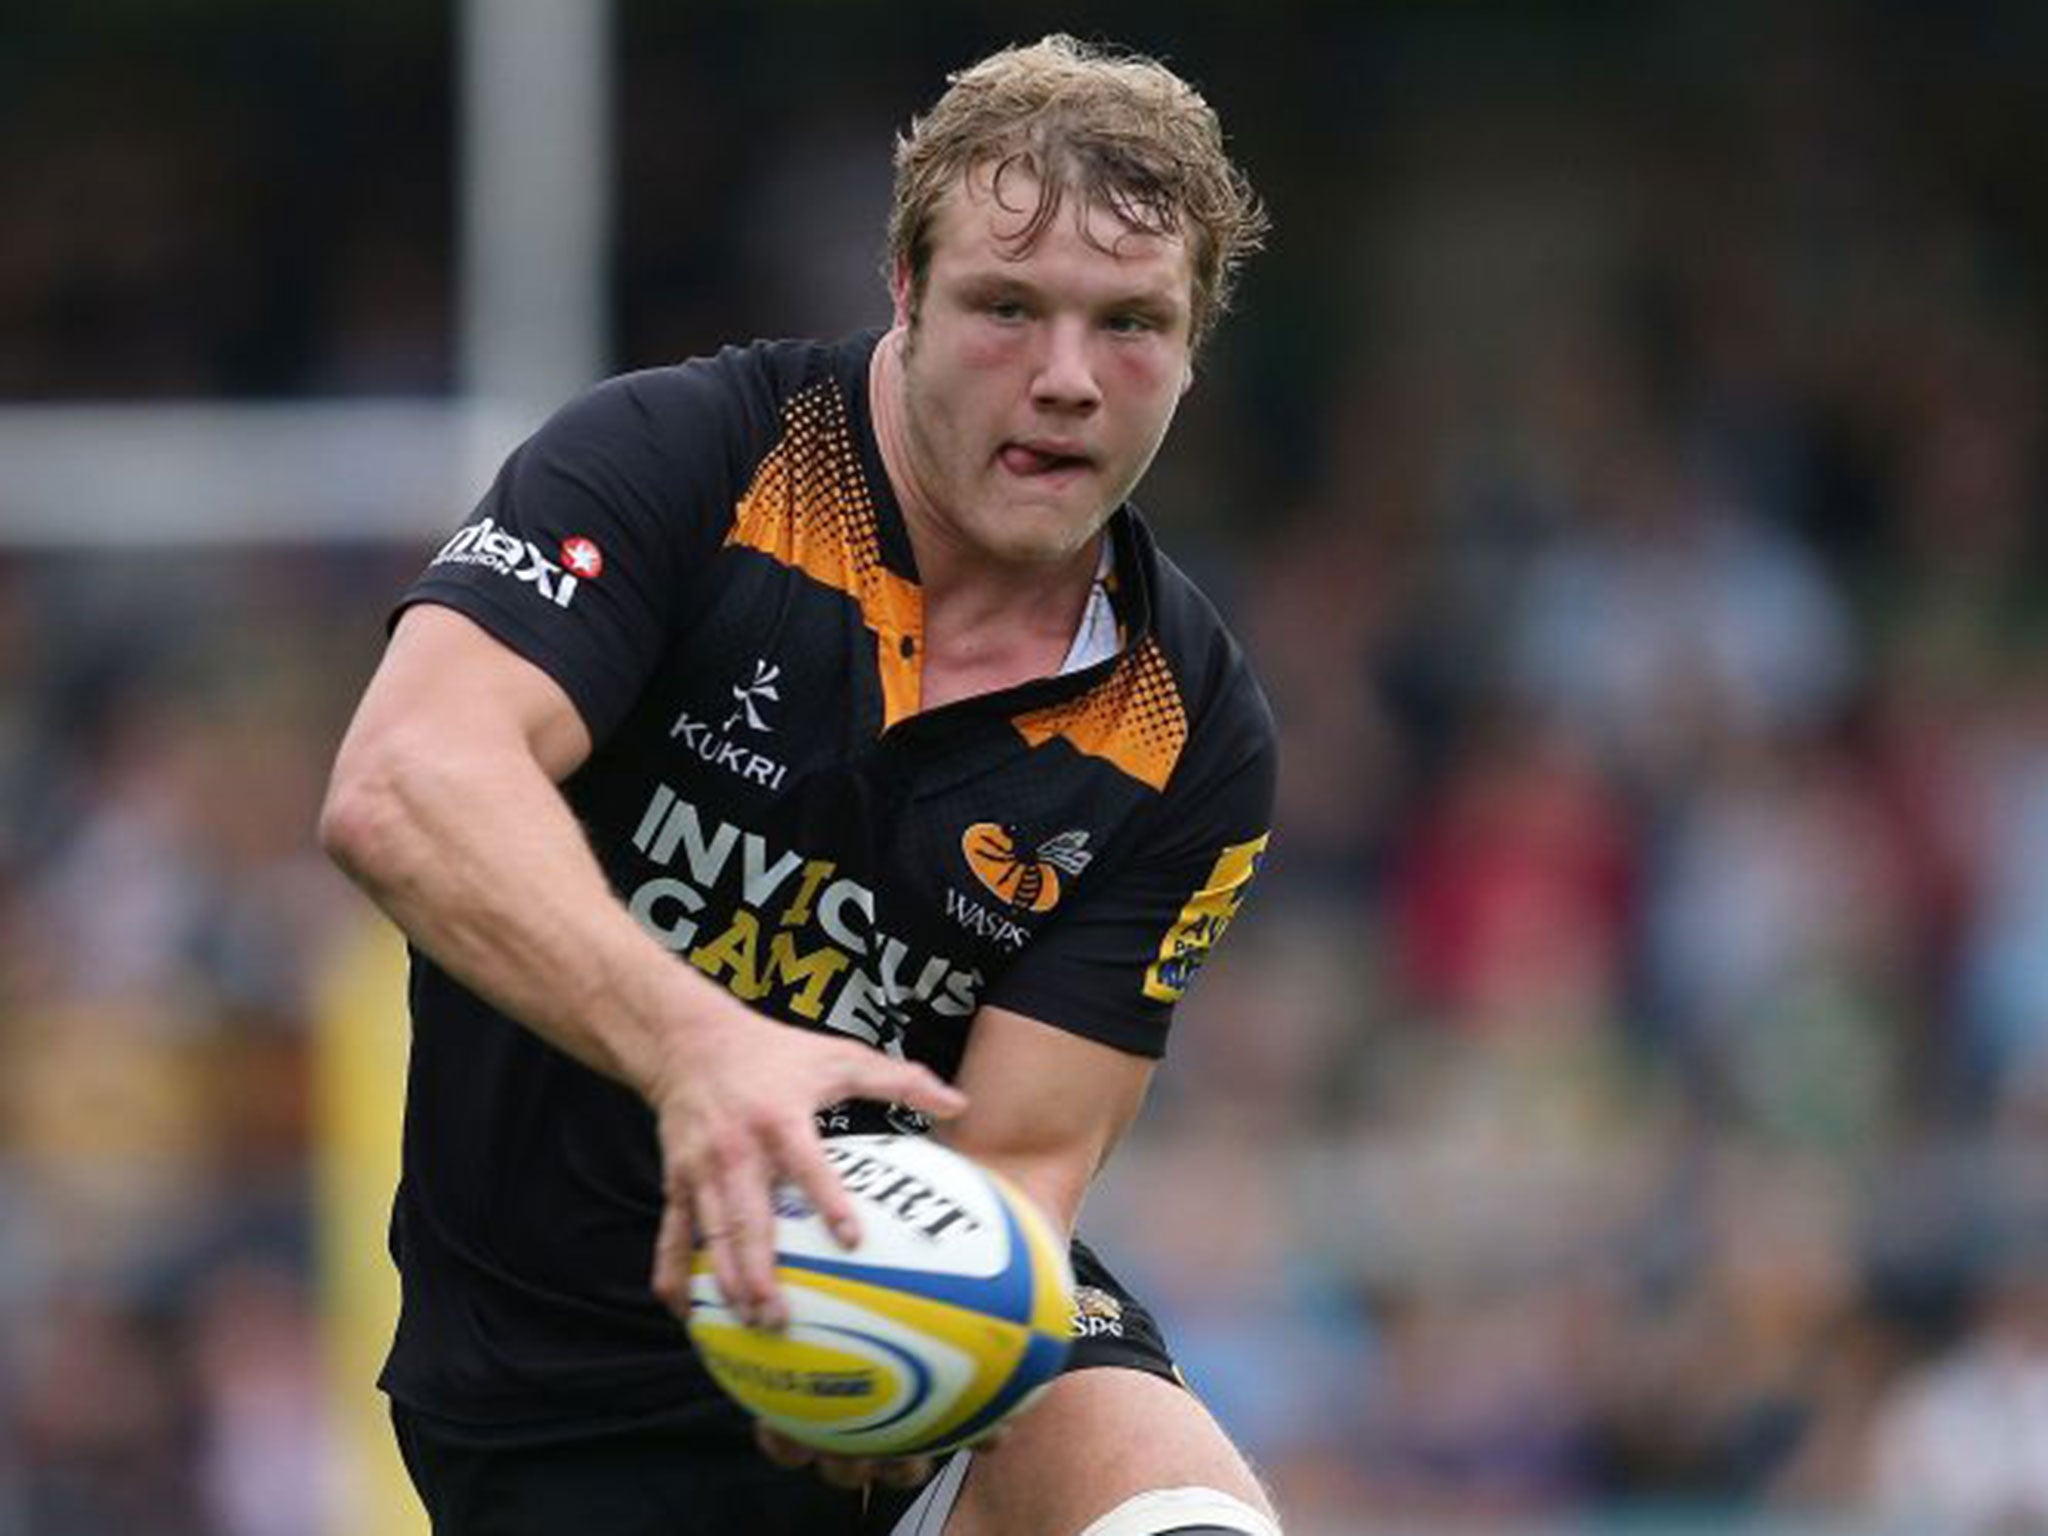 Back in the fray: Joe Launchbury to make his return from injury